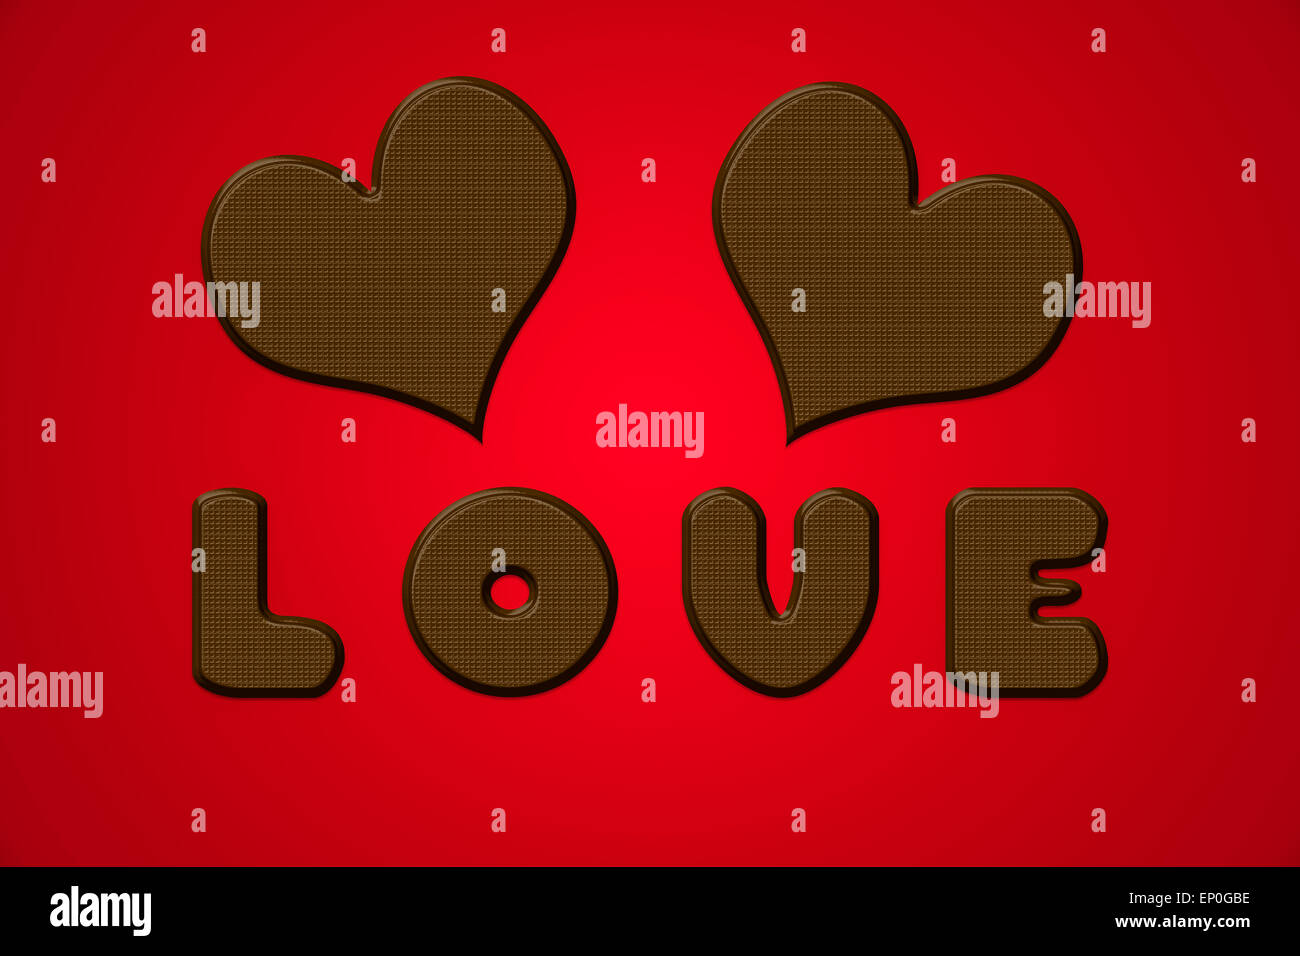 Love letters and hearts in chocolate for valentine day. Illustration on red background. Stock Photo